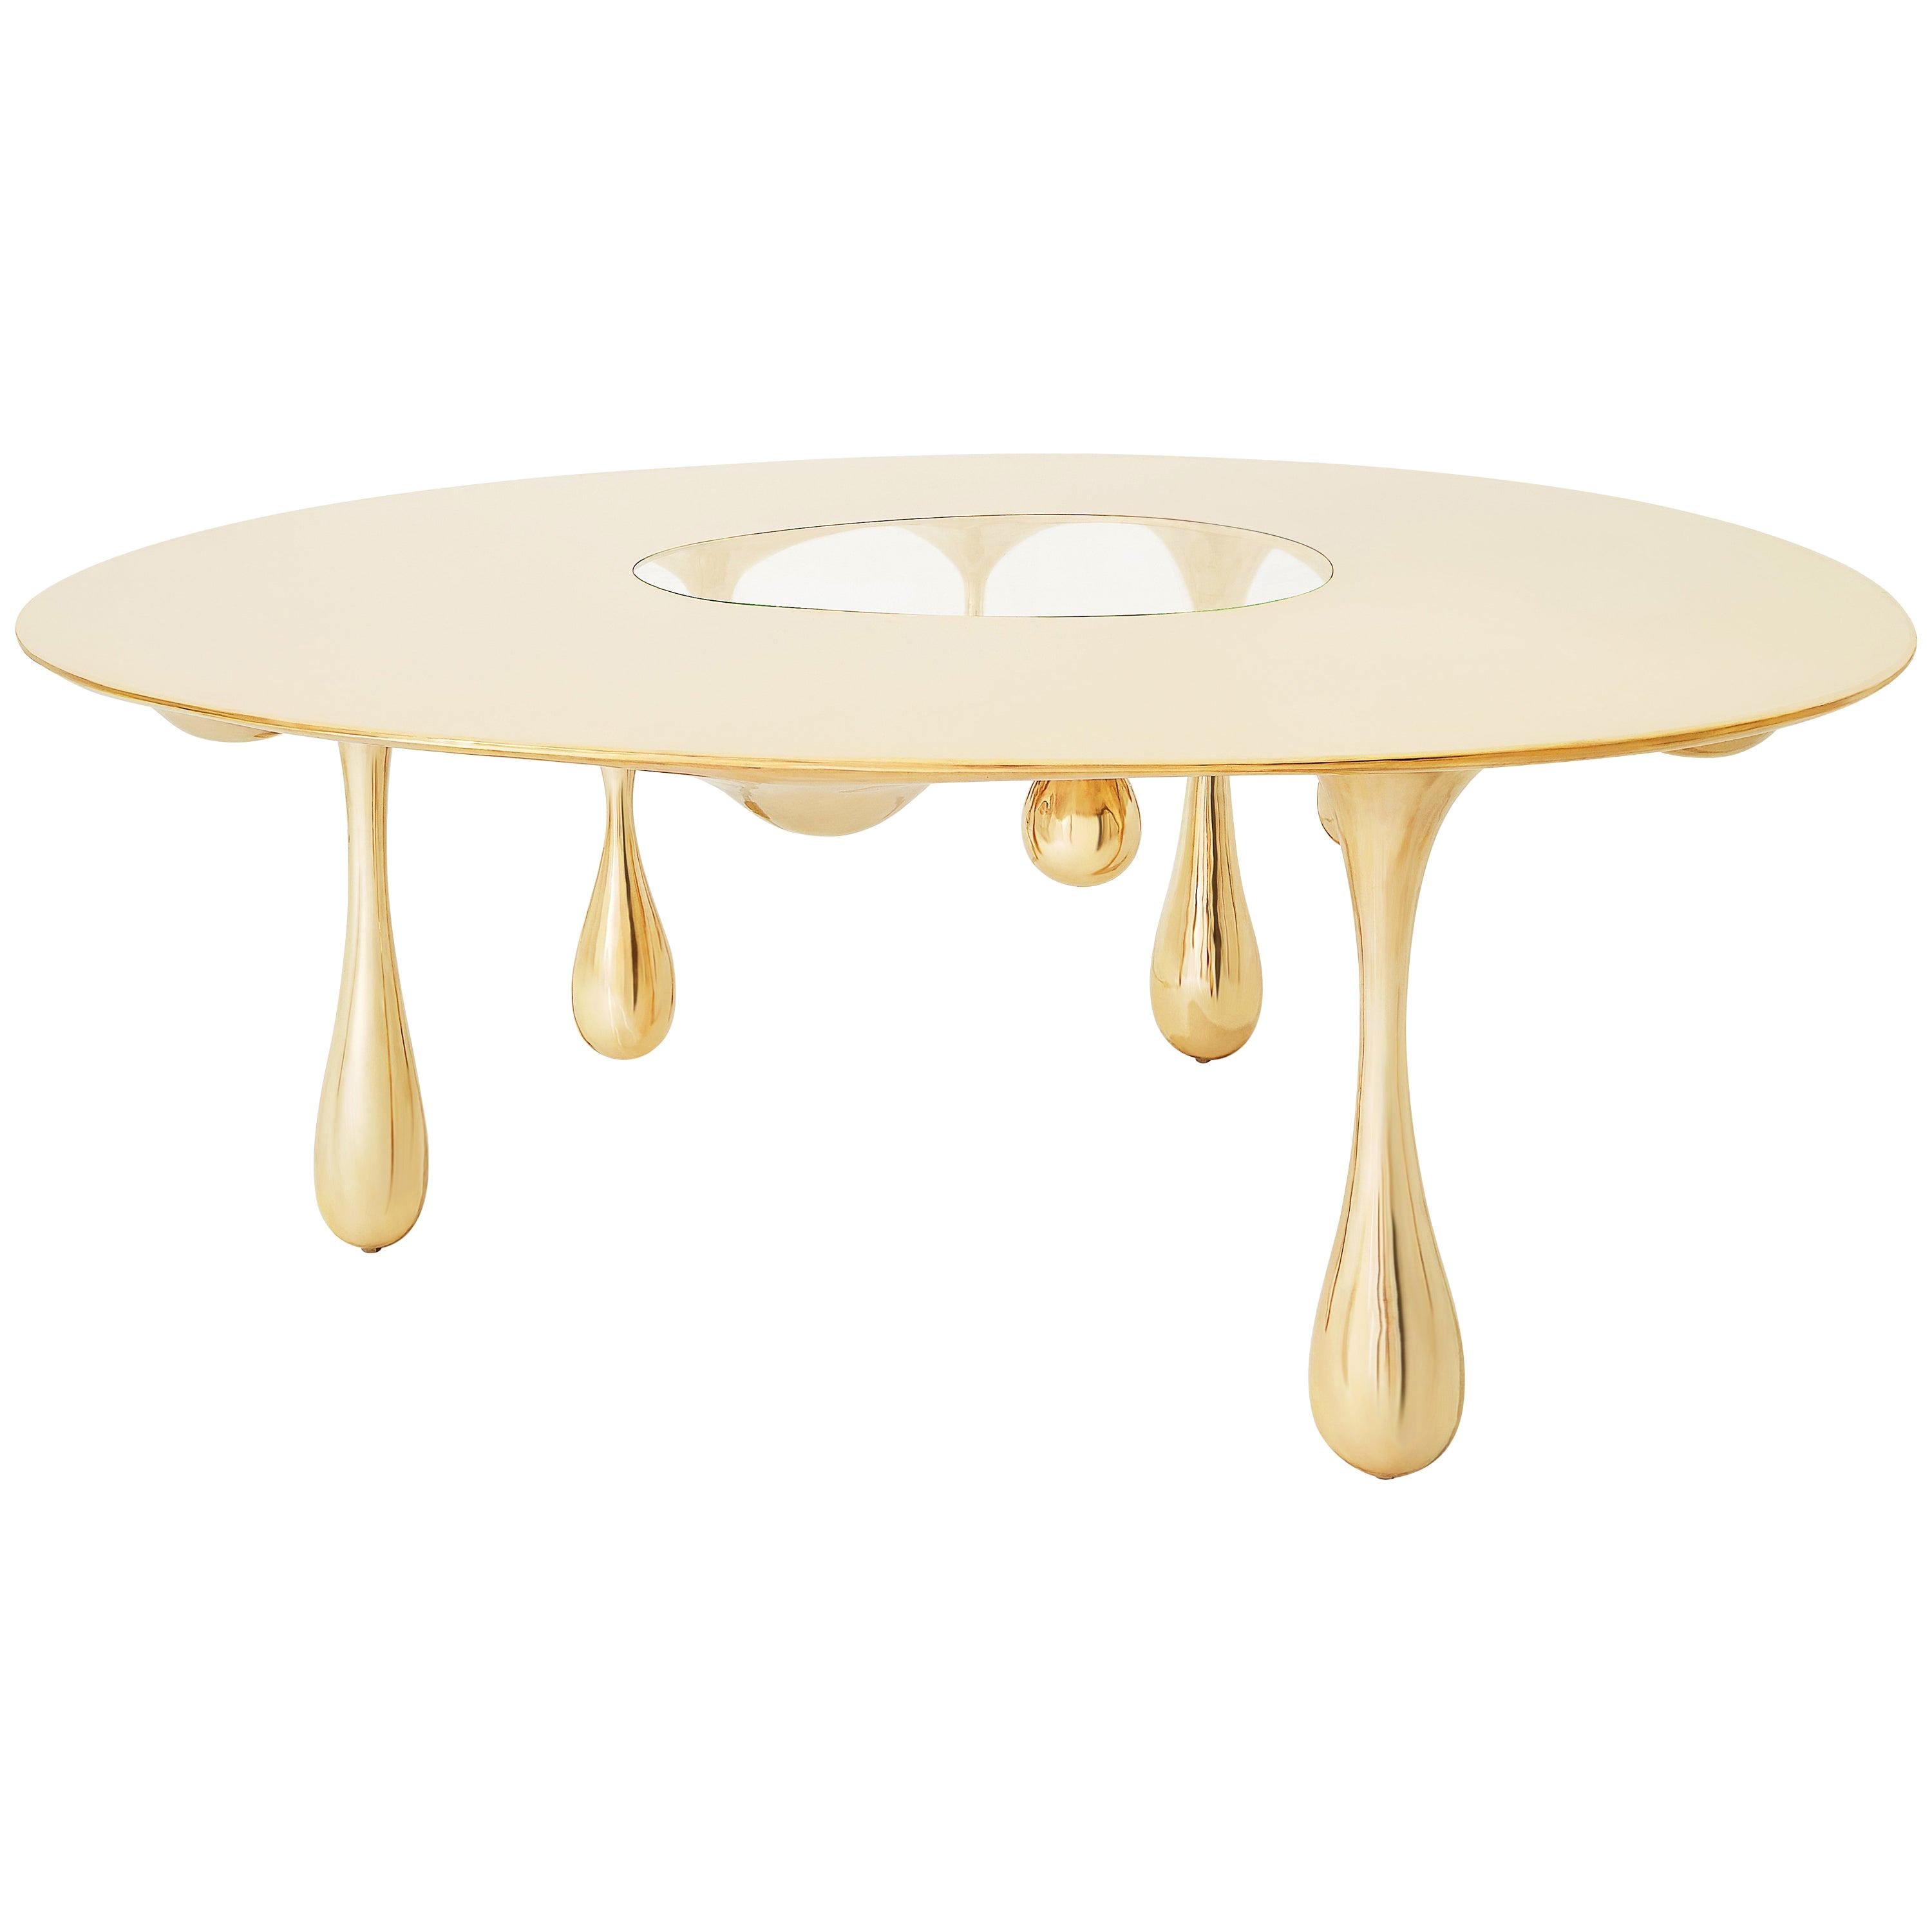 Deposit 2 Melting Dining Table Round Polished Brass Table by Zhipeng Tan